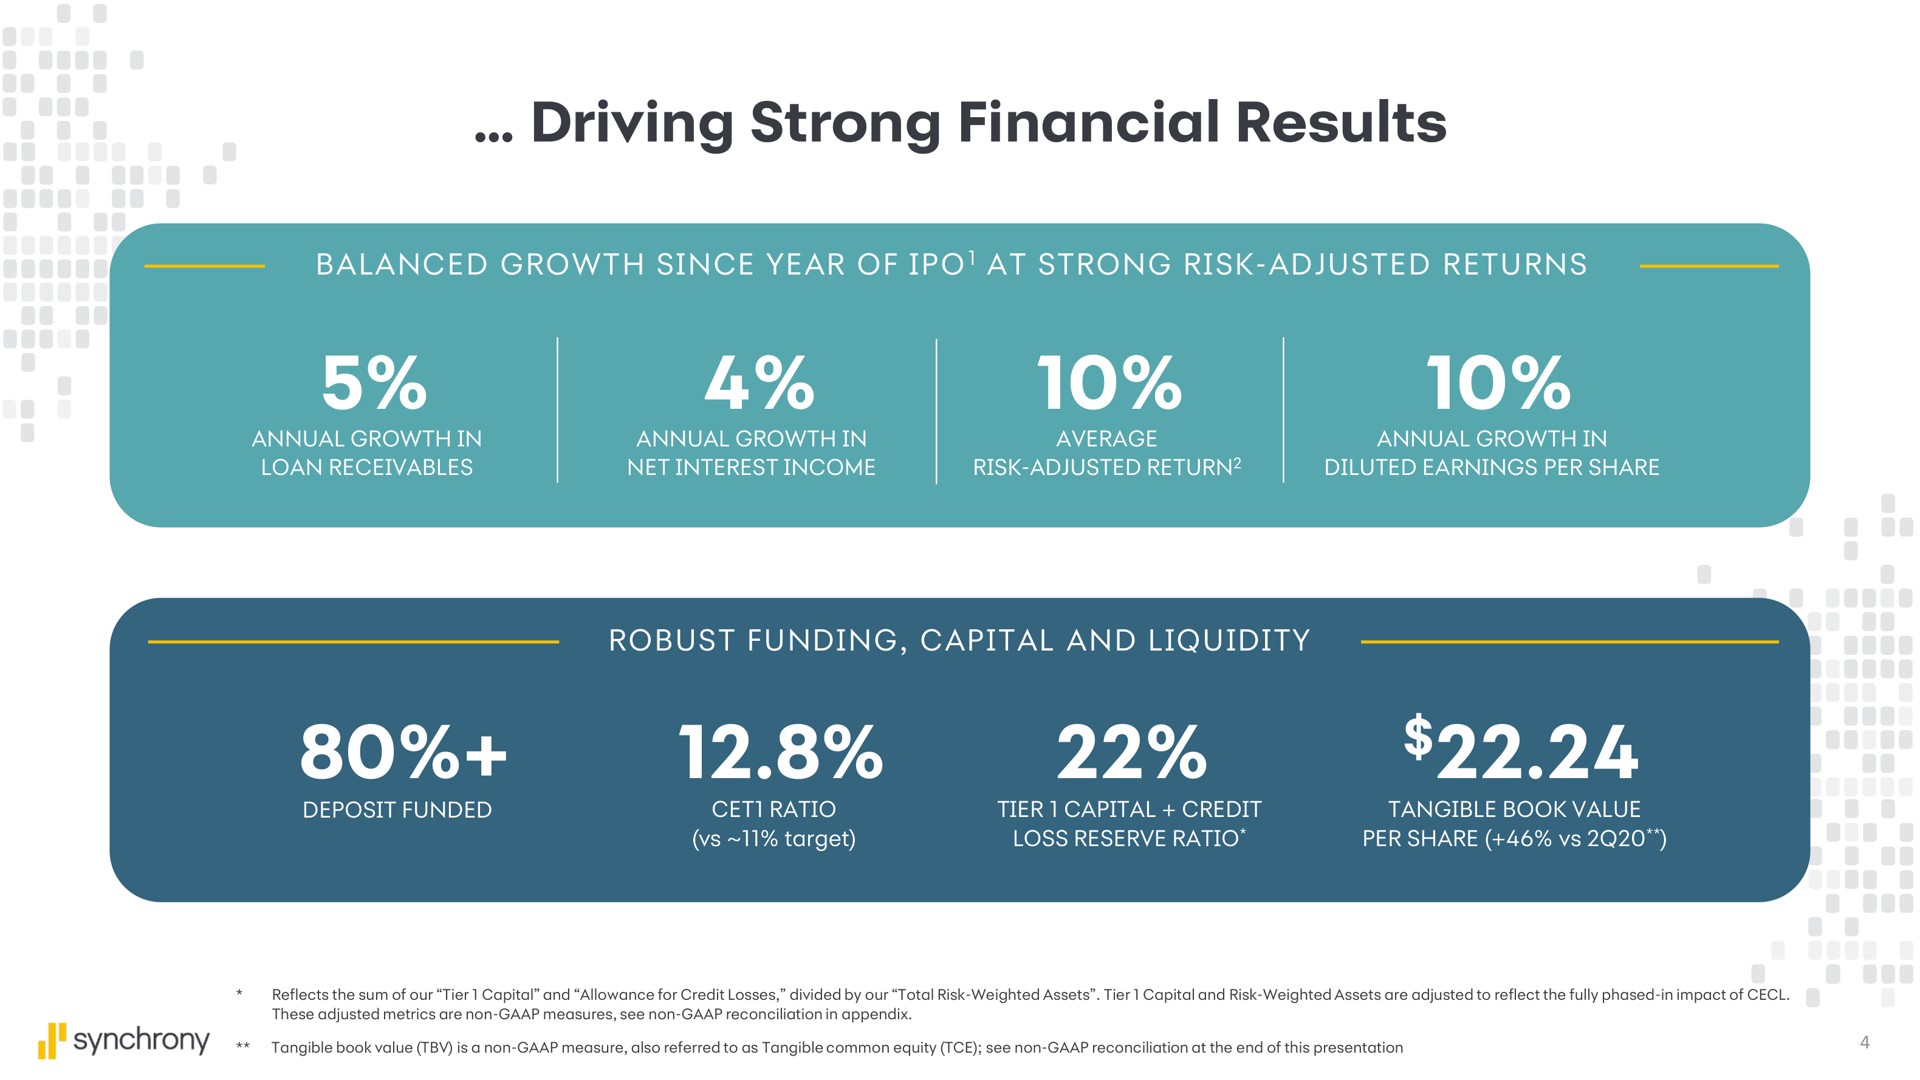 driving strong financial results | Synchrony Financial